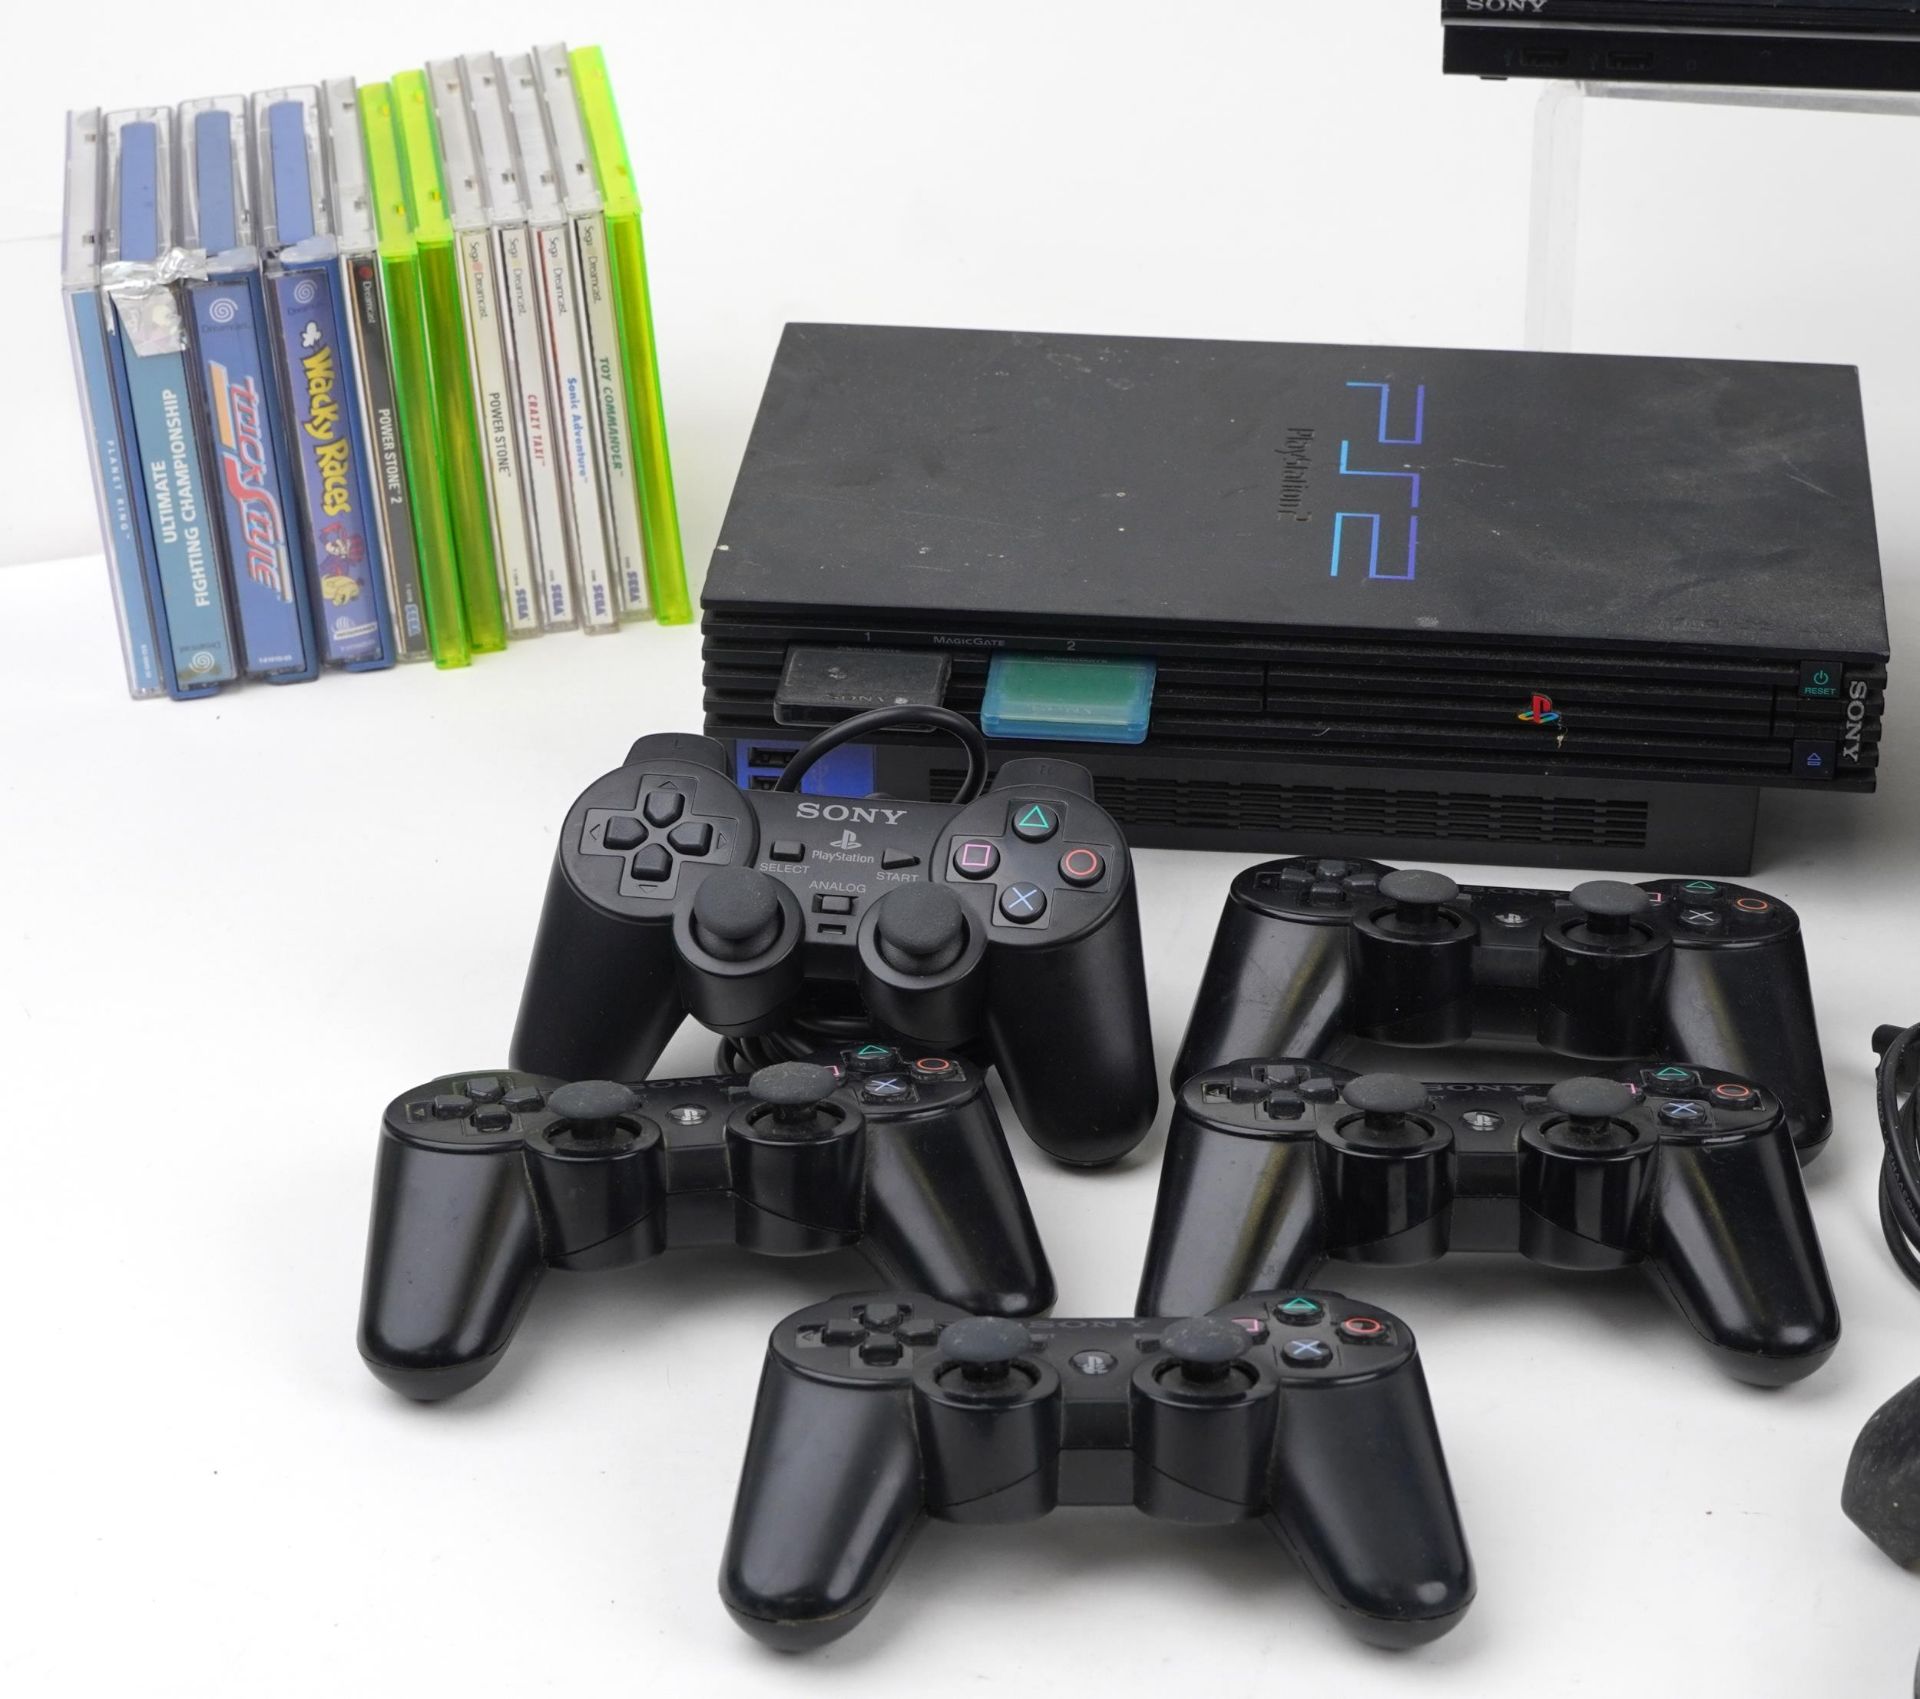 Three games consoles, games and controllers comprising Xbox, Sony PlayStation 2, Sony PlayStation - Image 3 of 4